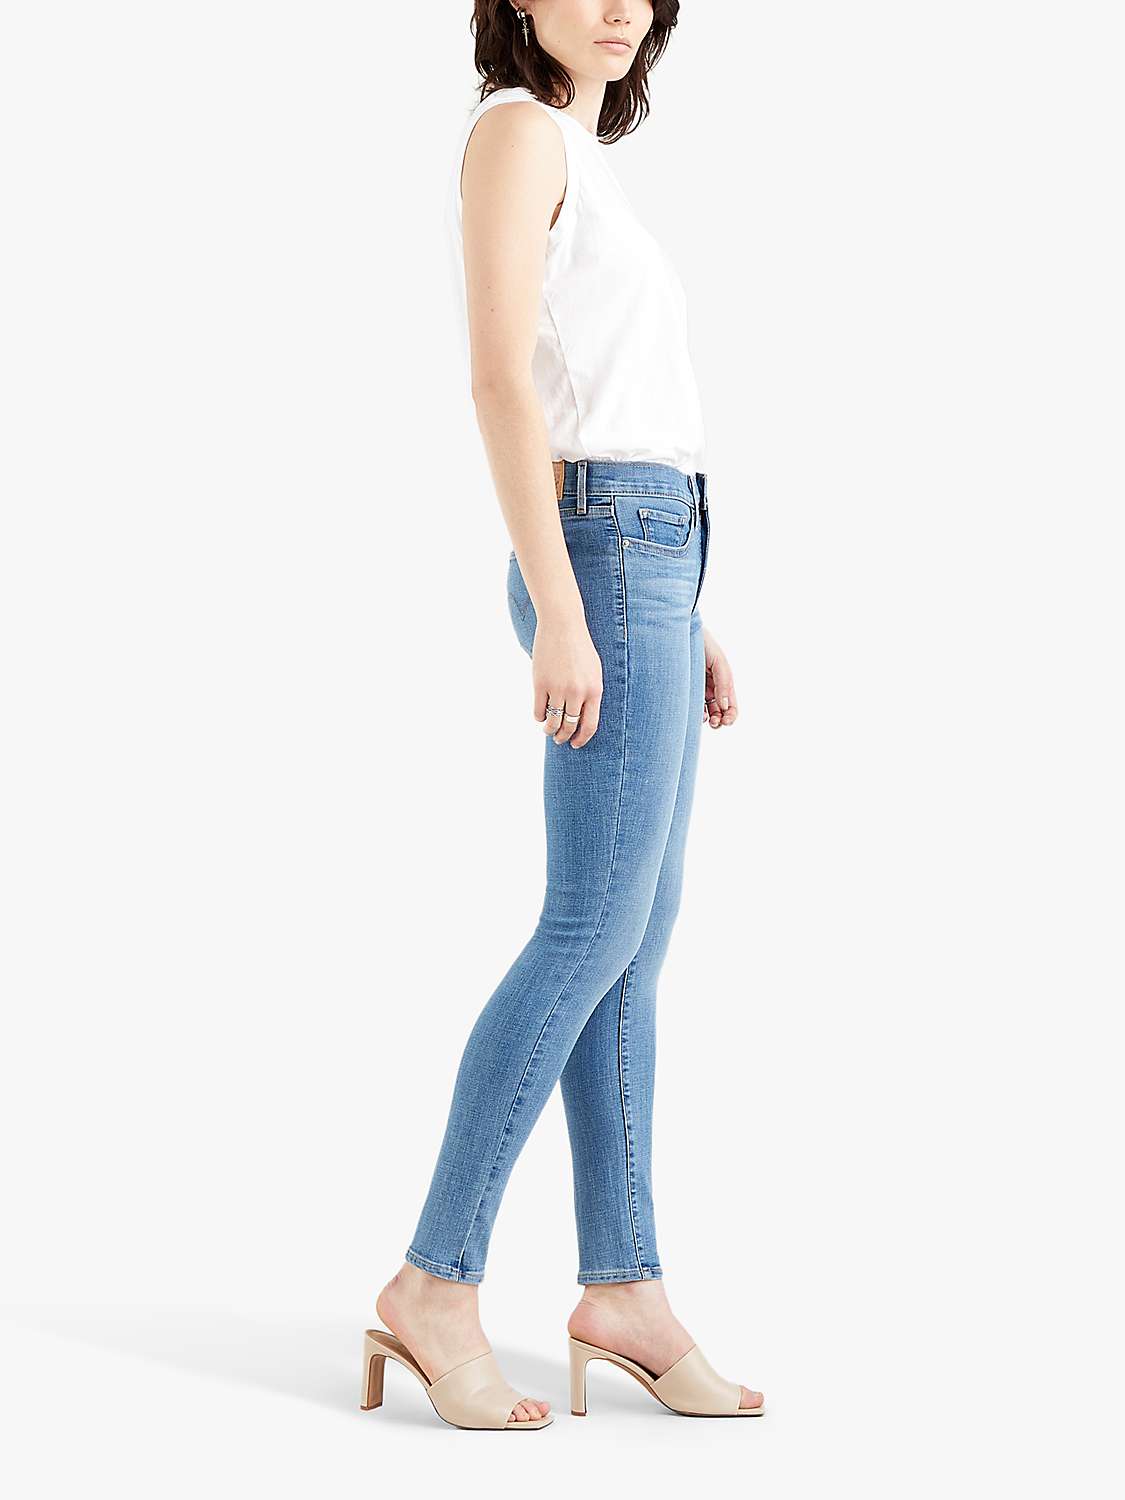 Buy Levi's 311 Shaping Skinny Jeans, Slate Will Online at johnlewis.com